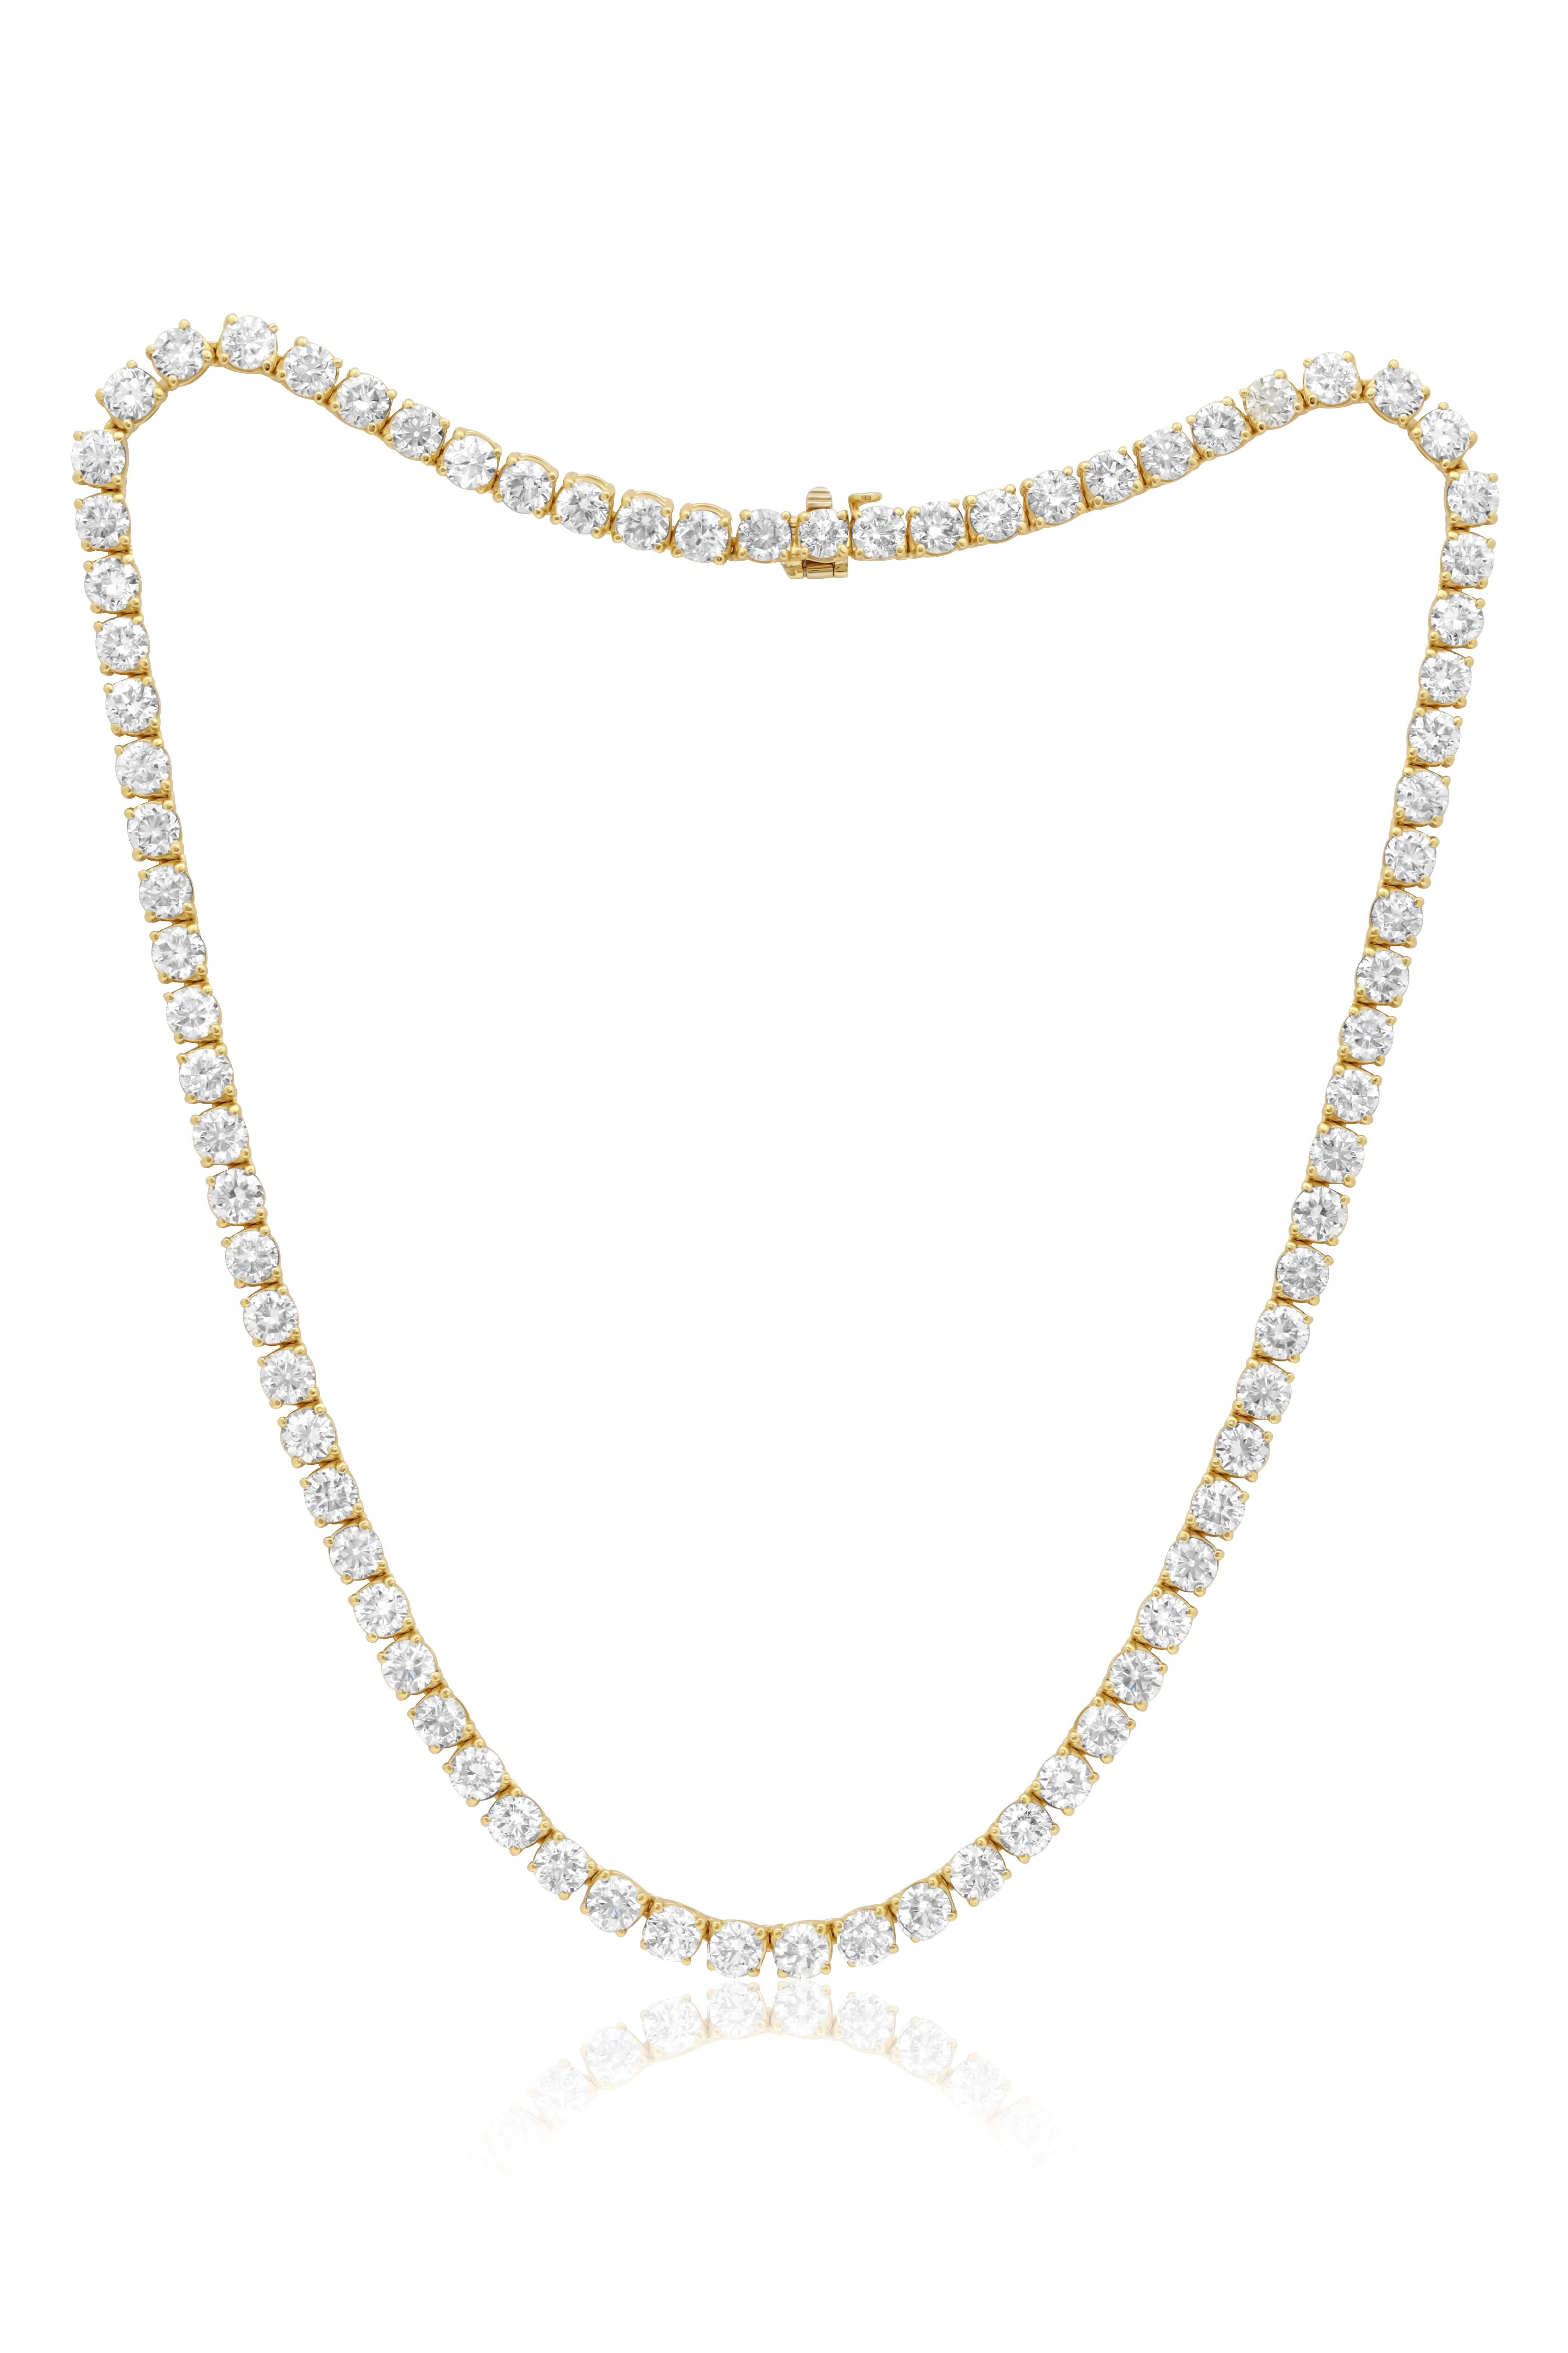 18 kt yellow gold 4 prong diamond tennis necklace containing 28.70 cts tw of brilliant cut round diamonds 